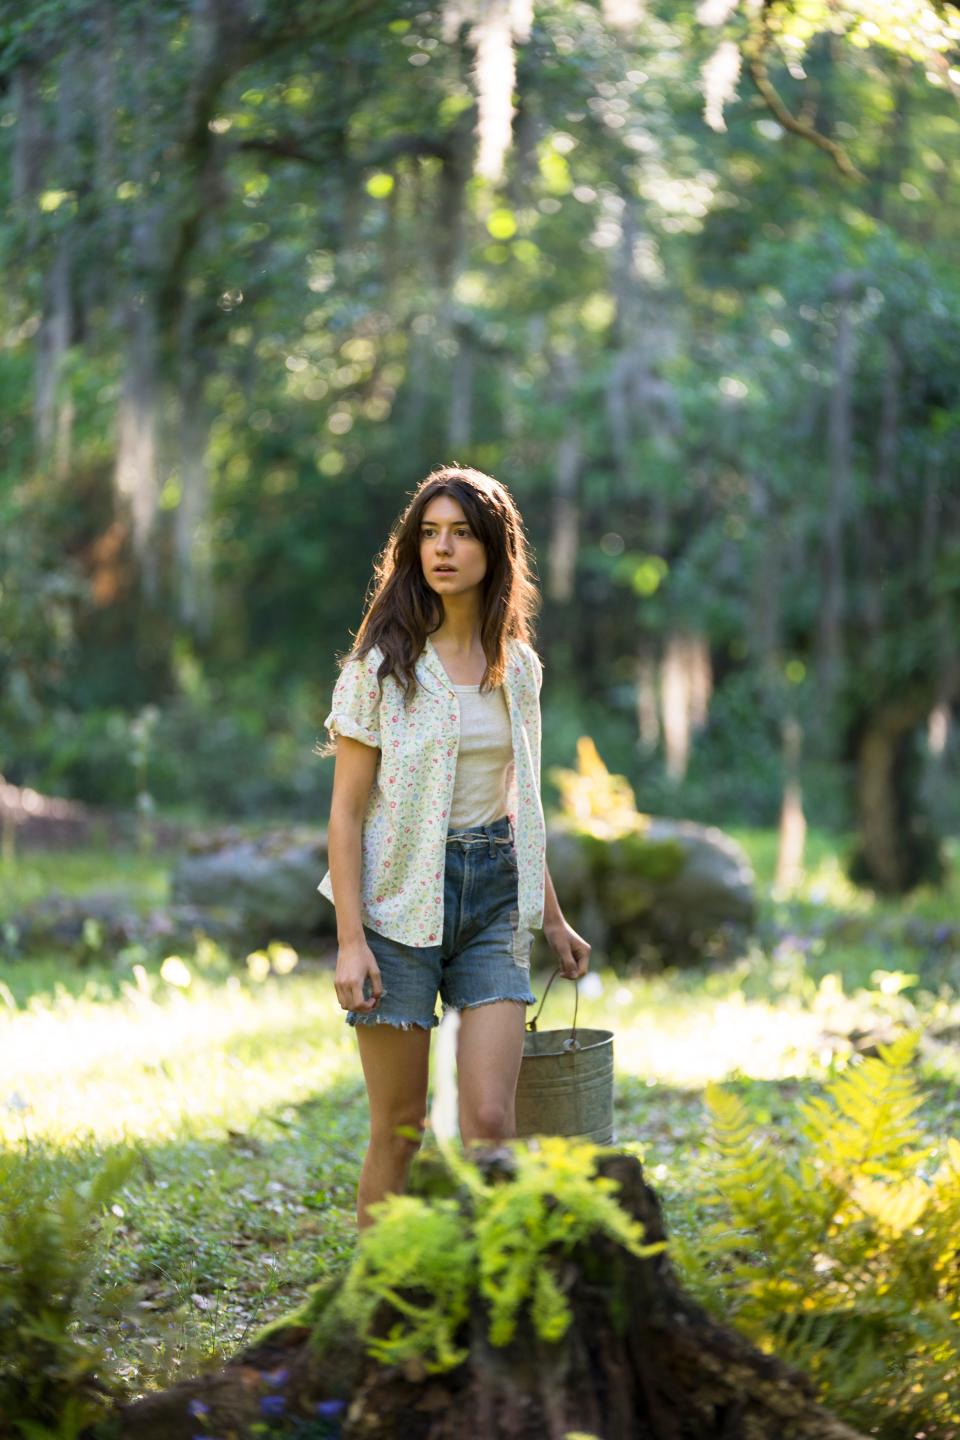 "Where the Crawdads Sing" (July 15, theaters): Based on the Delia Owen novel, the mystery drama stars Daisy Edgar-Jones as a woman who raised herself in the North Carolina marshlands but when she opens herself up to a larger world, becomes a main suspect in a murder.